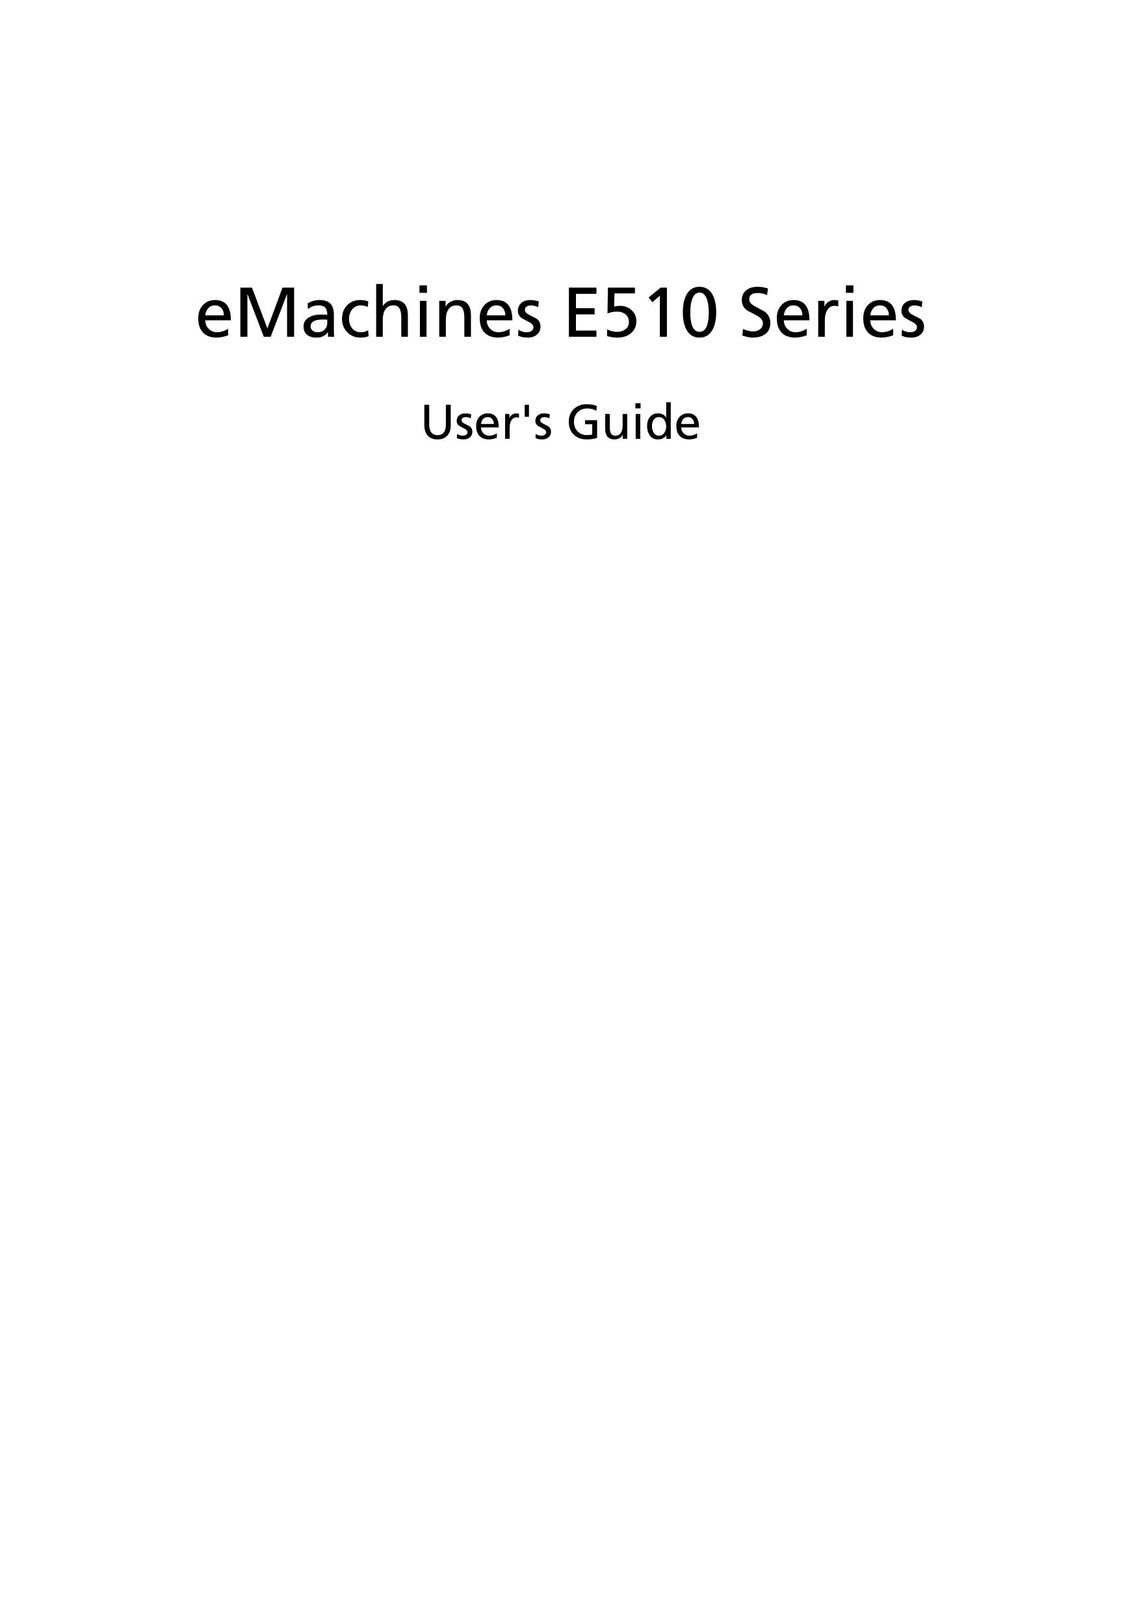 eMachines E510 Series Laptop User Manual